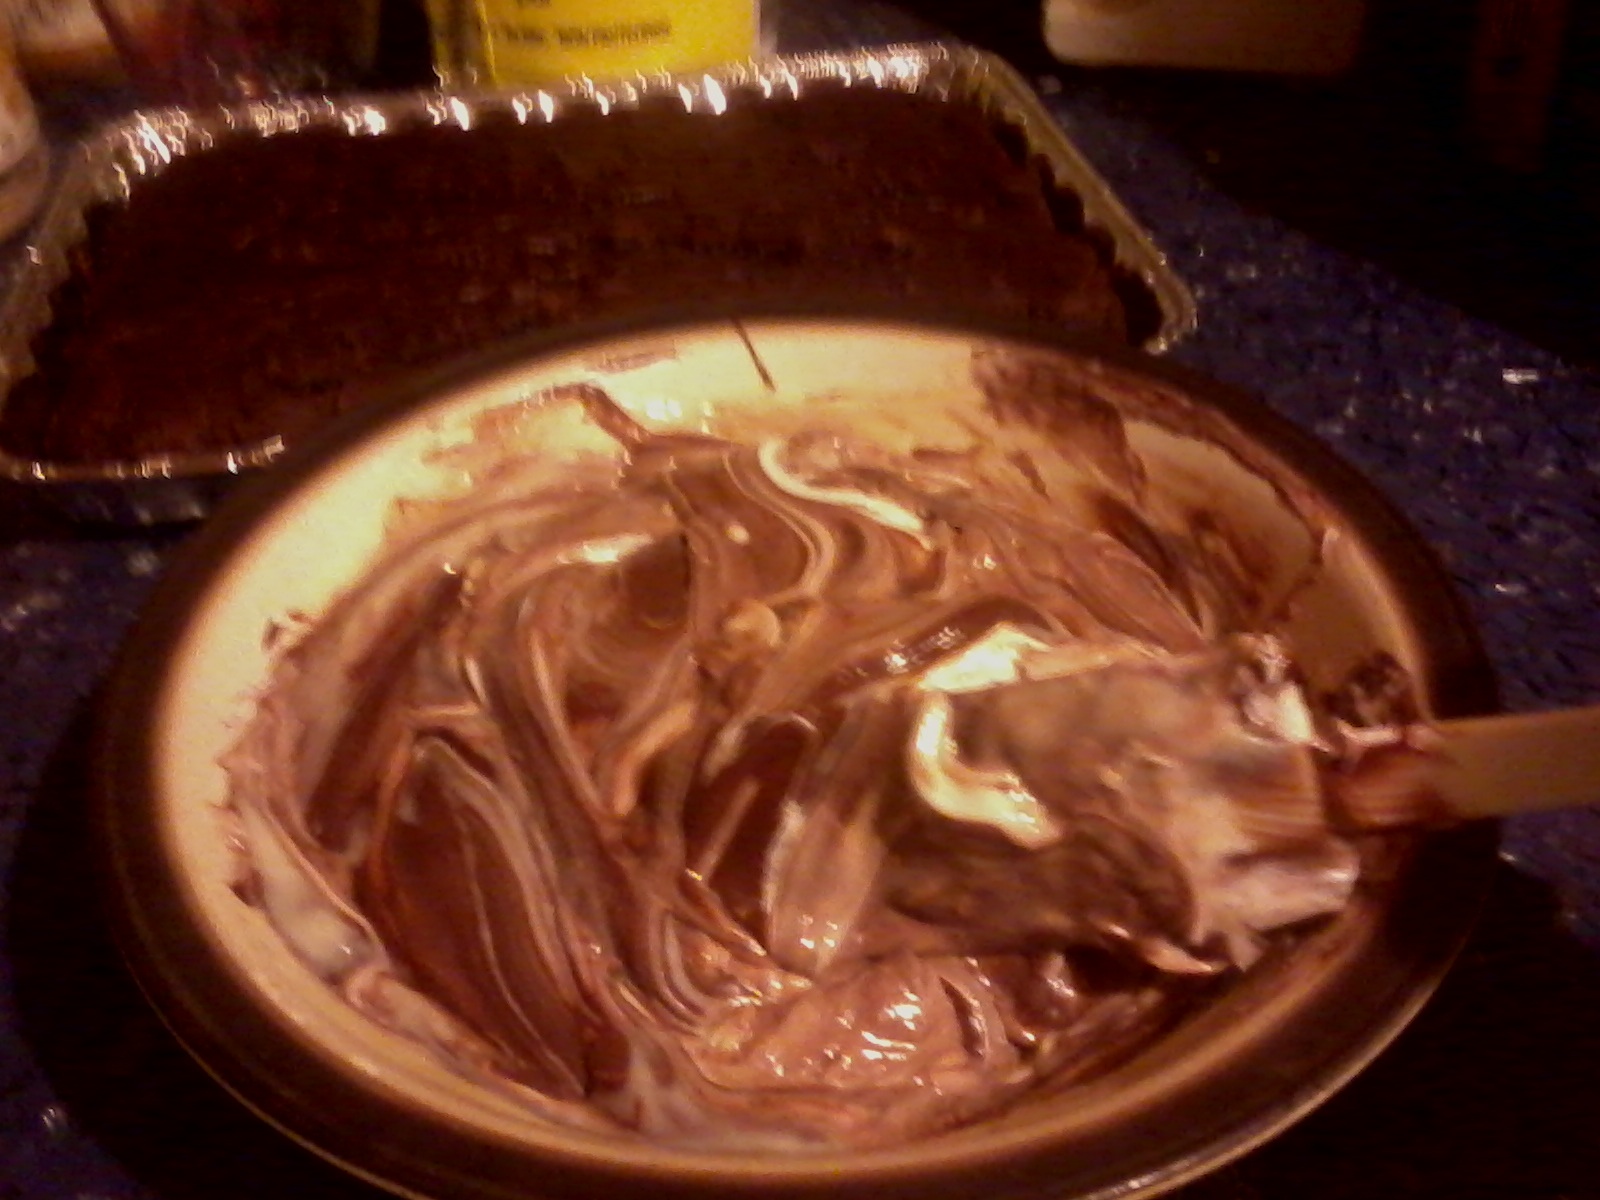 Mixing the frosting